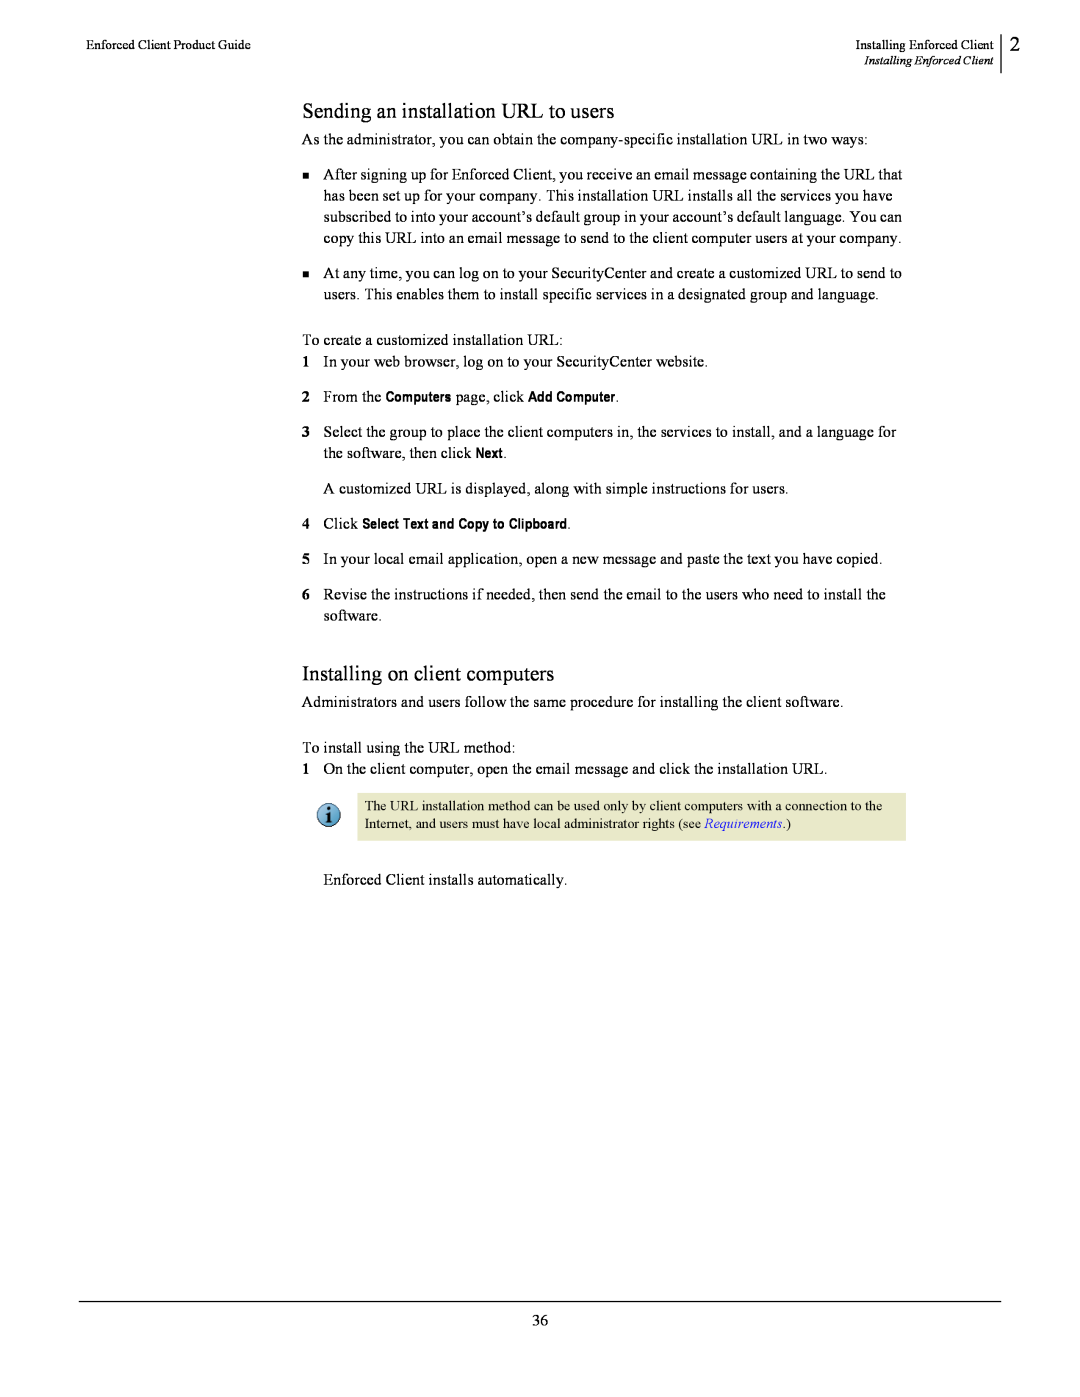 SonicWALL 4.5 manual Sending an installation URL to users, Installing on client computers 